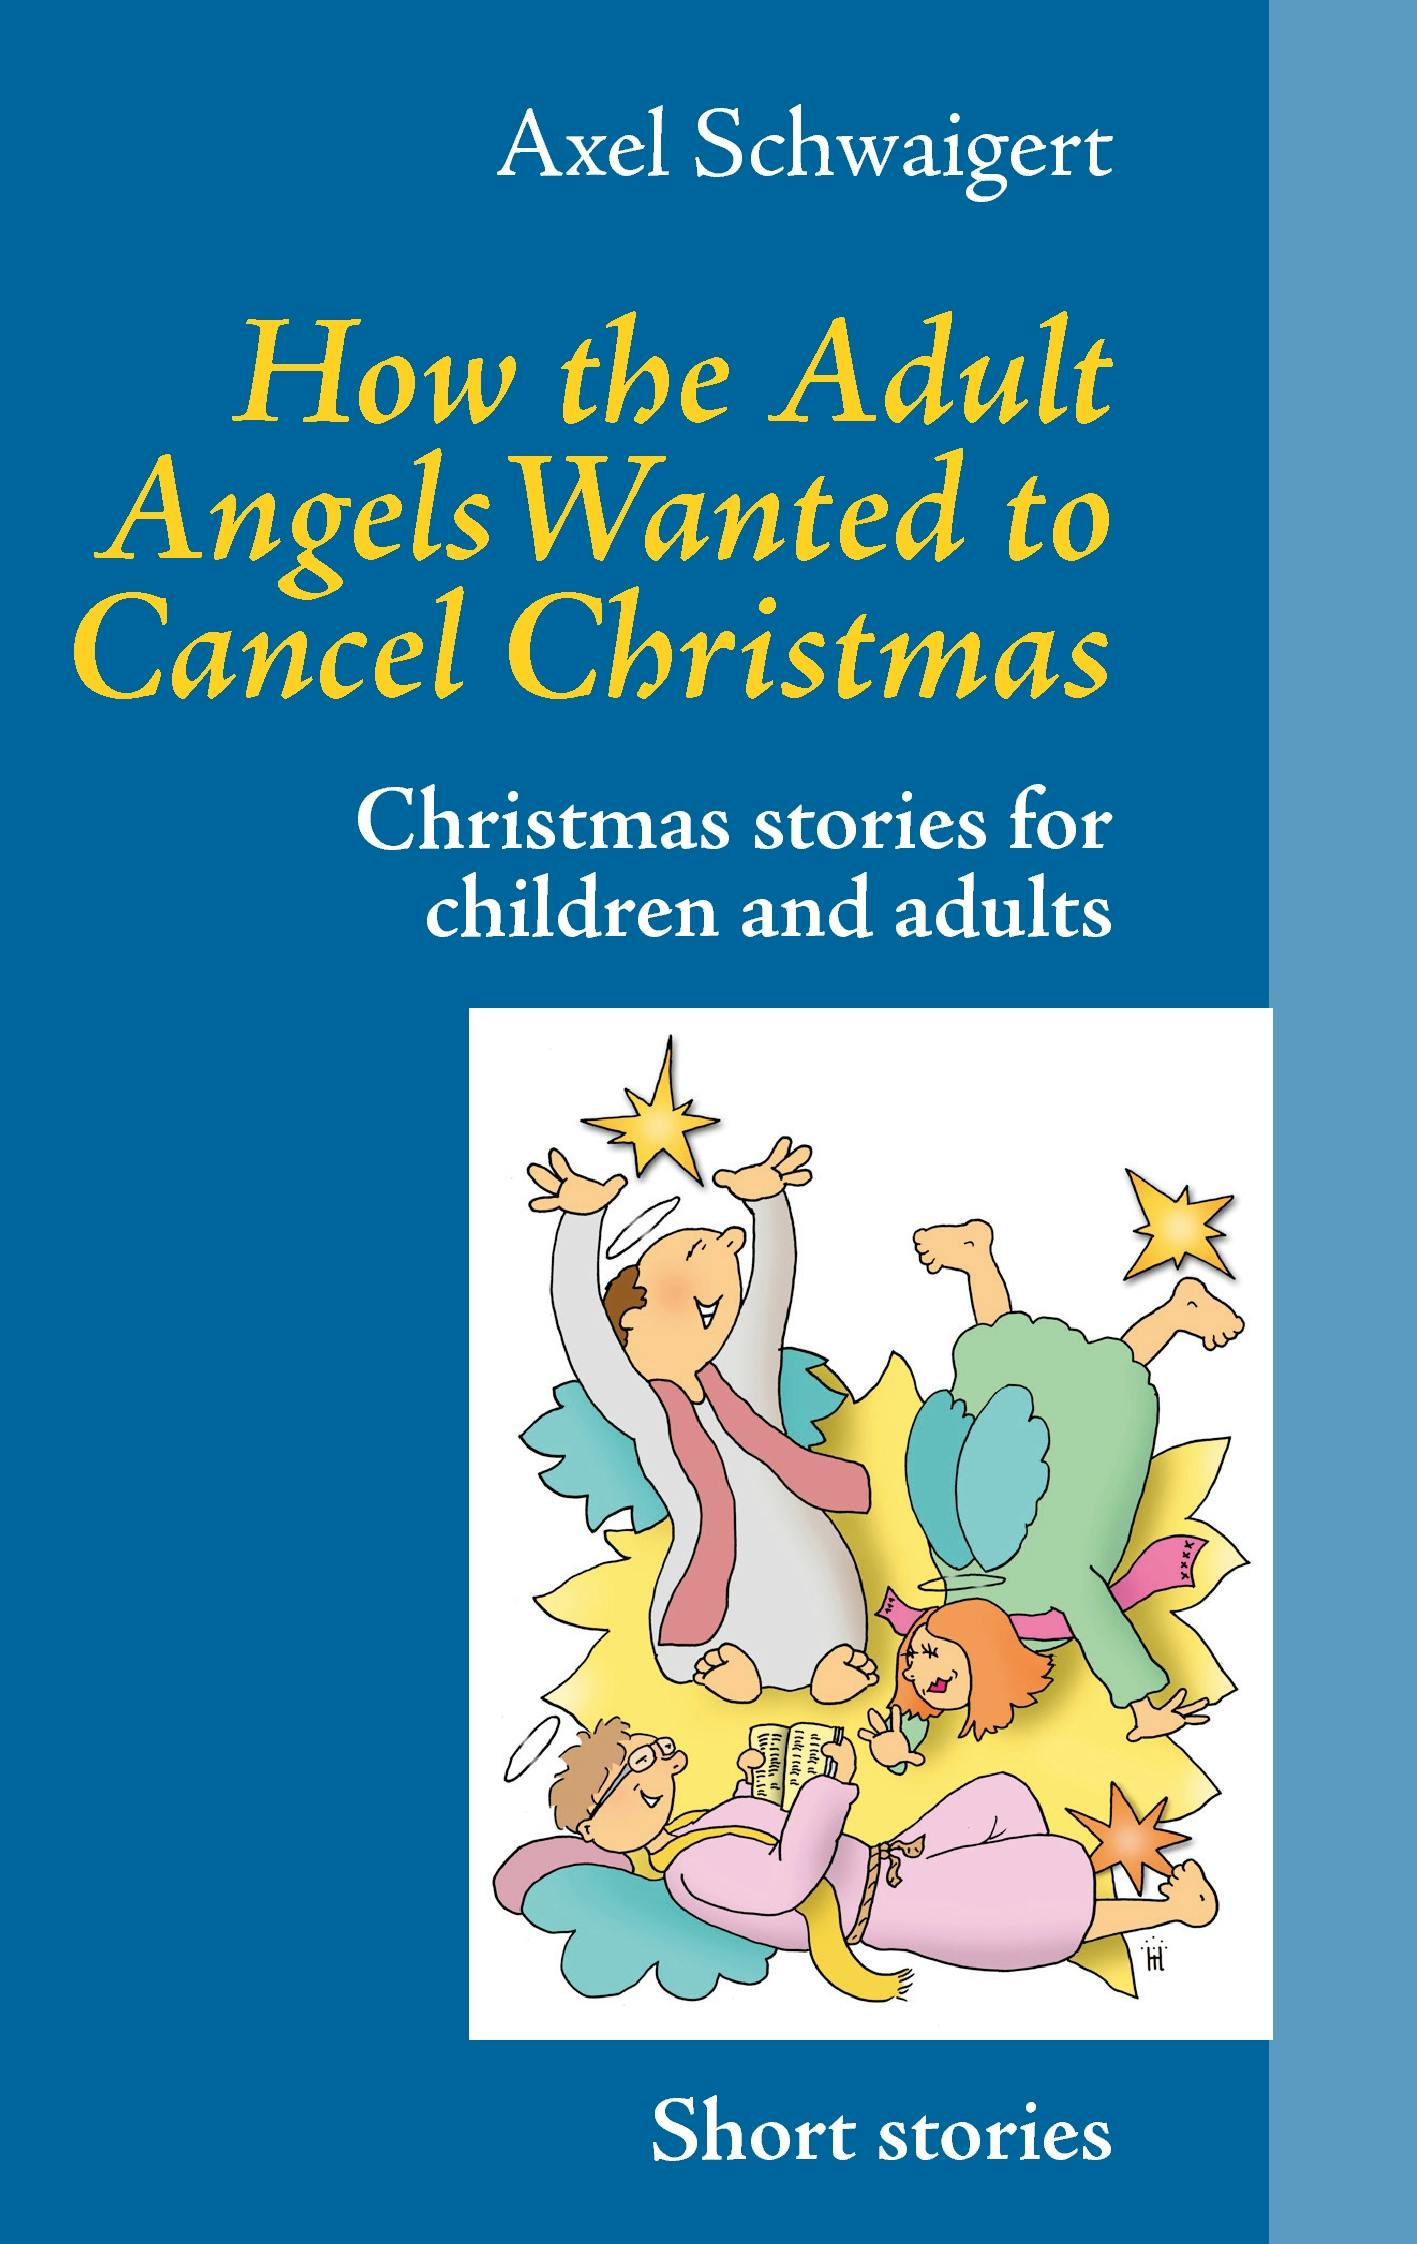 How the Adult Angels Wanted to Cancel Christmas - Axel Schwaigert